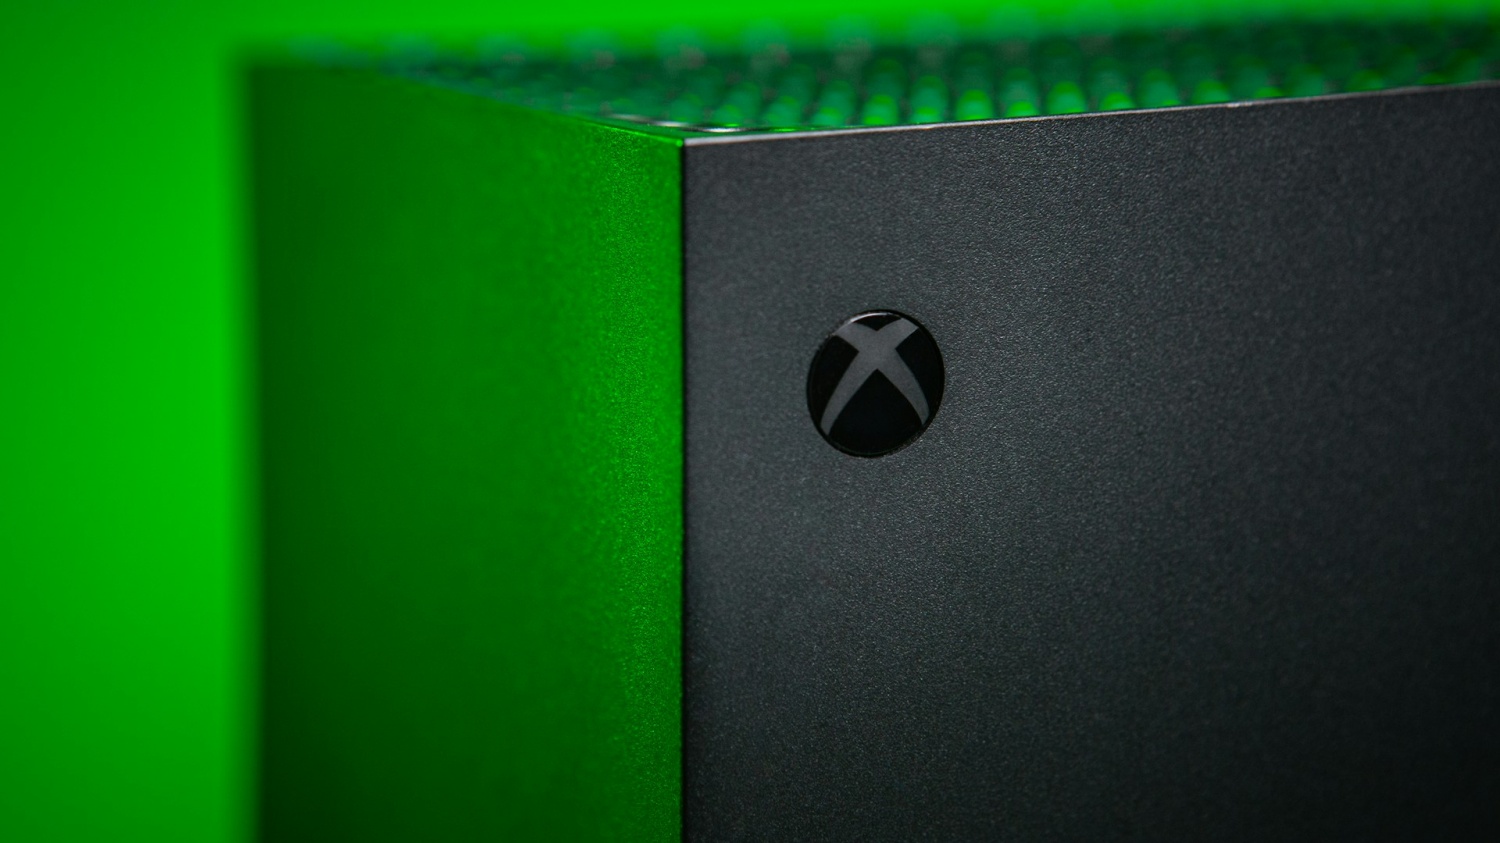 Xbox Series X Restock: Argos Spotted Selling Next-Gen Console at £439.99